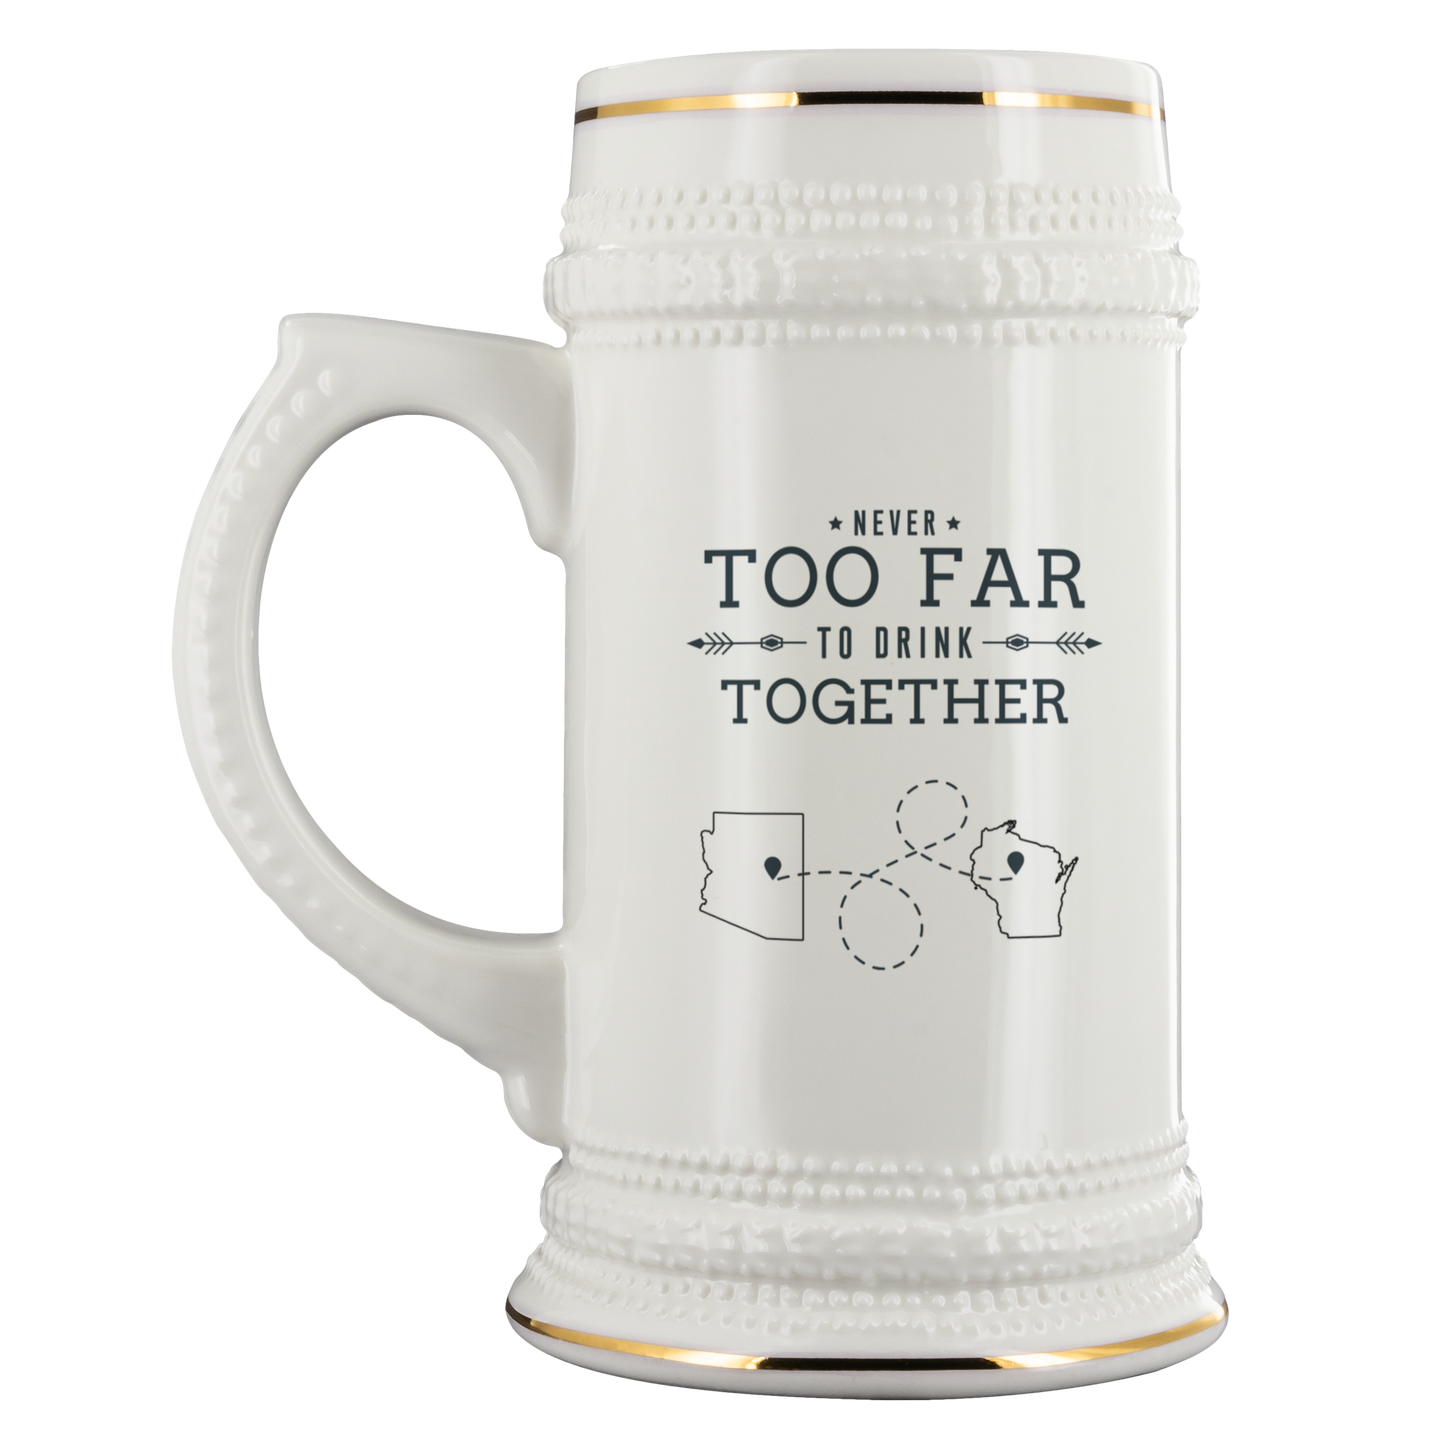 M-20402818-sp-17712 - Fathers Day Gifts Mug For Dad - Never Too Far To Drink Wine